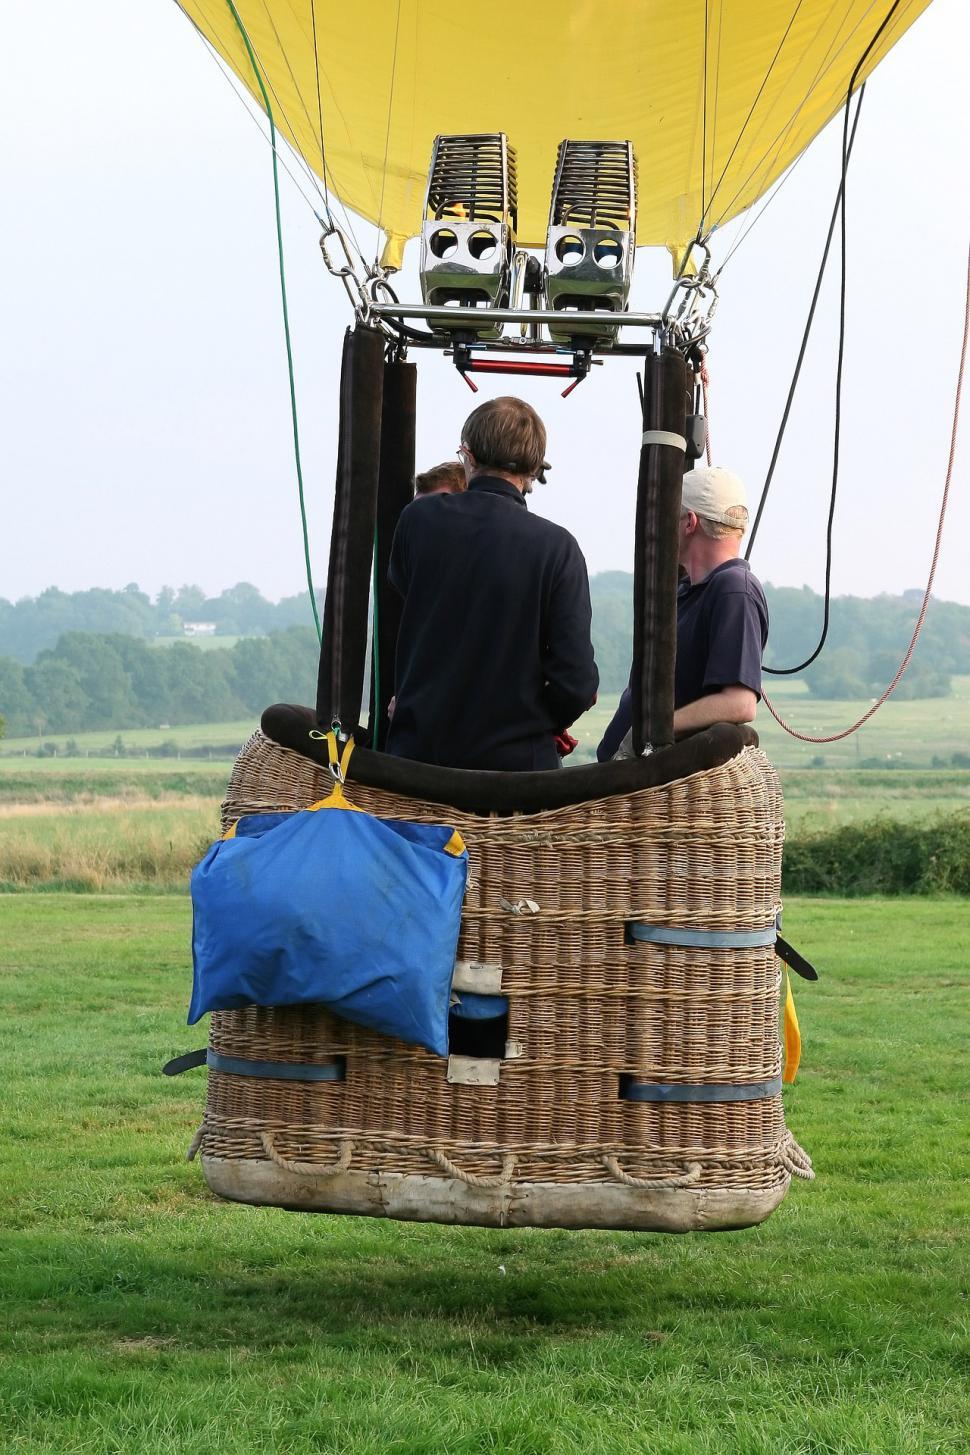 Free Image of People Inside Hot Air Balloon 